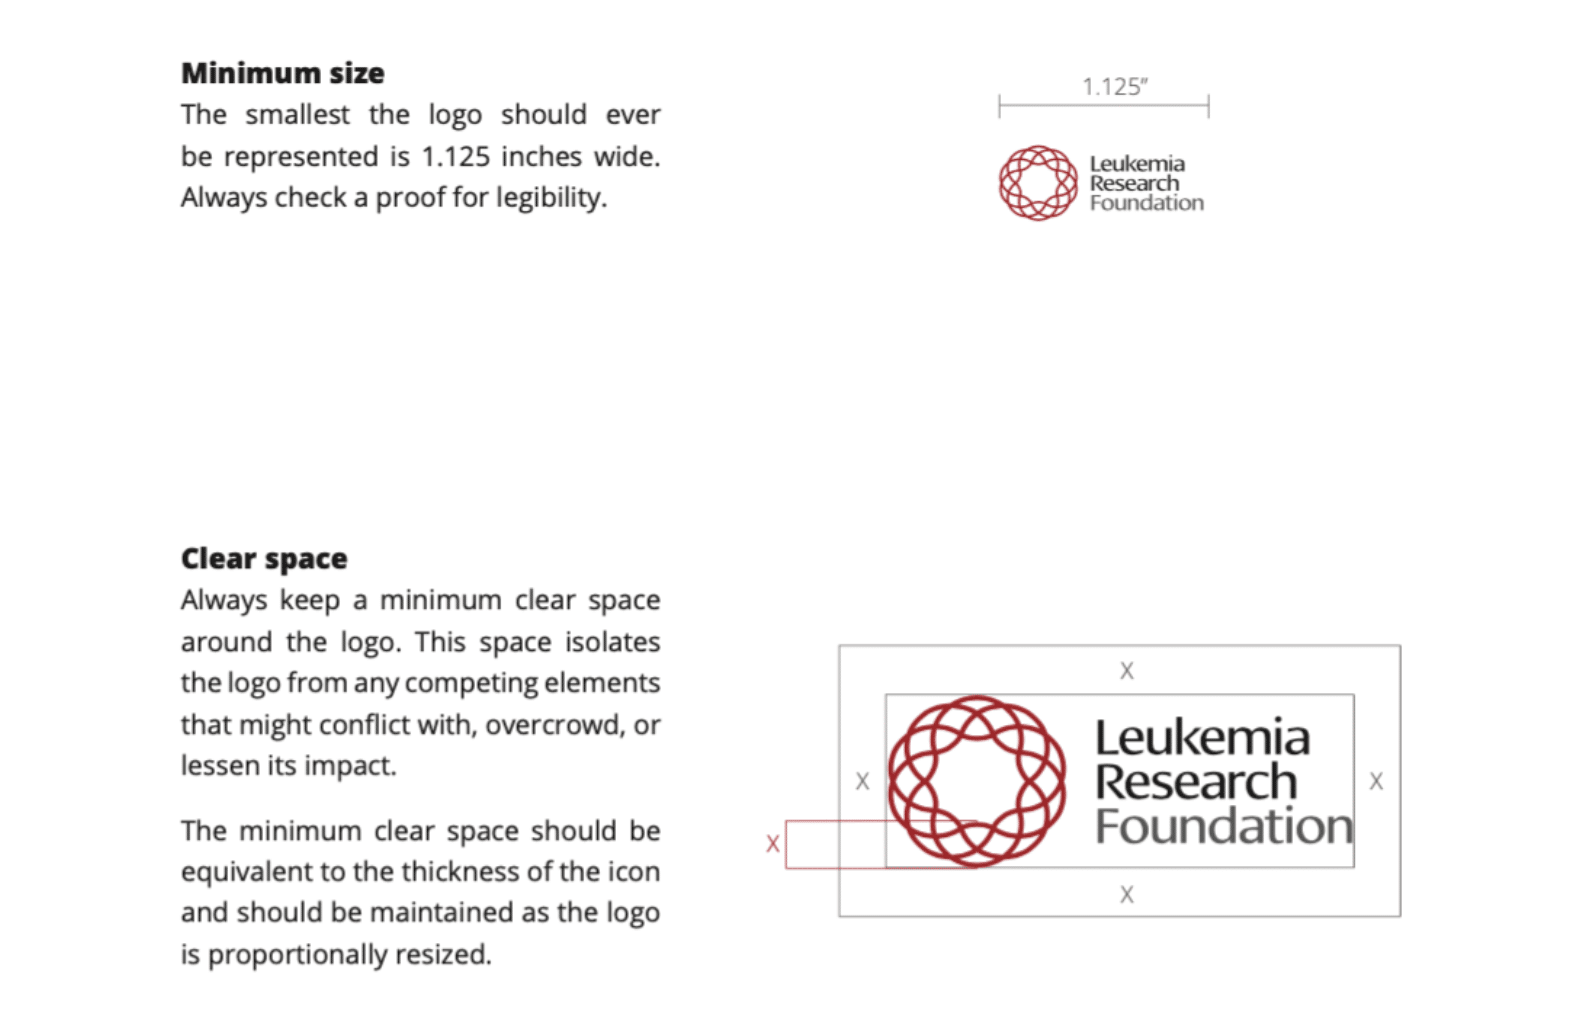 The logo guidelines from the Leukemia Research Foundation